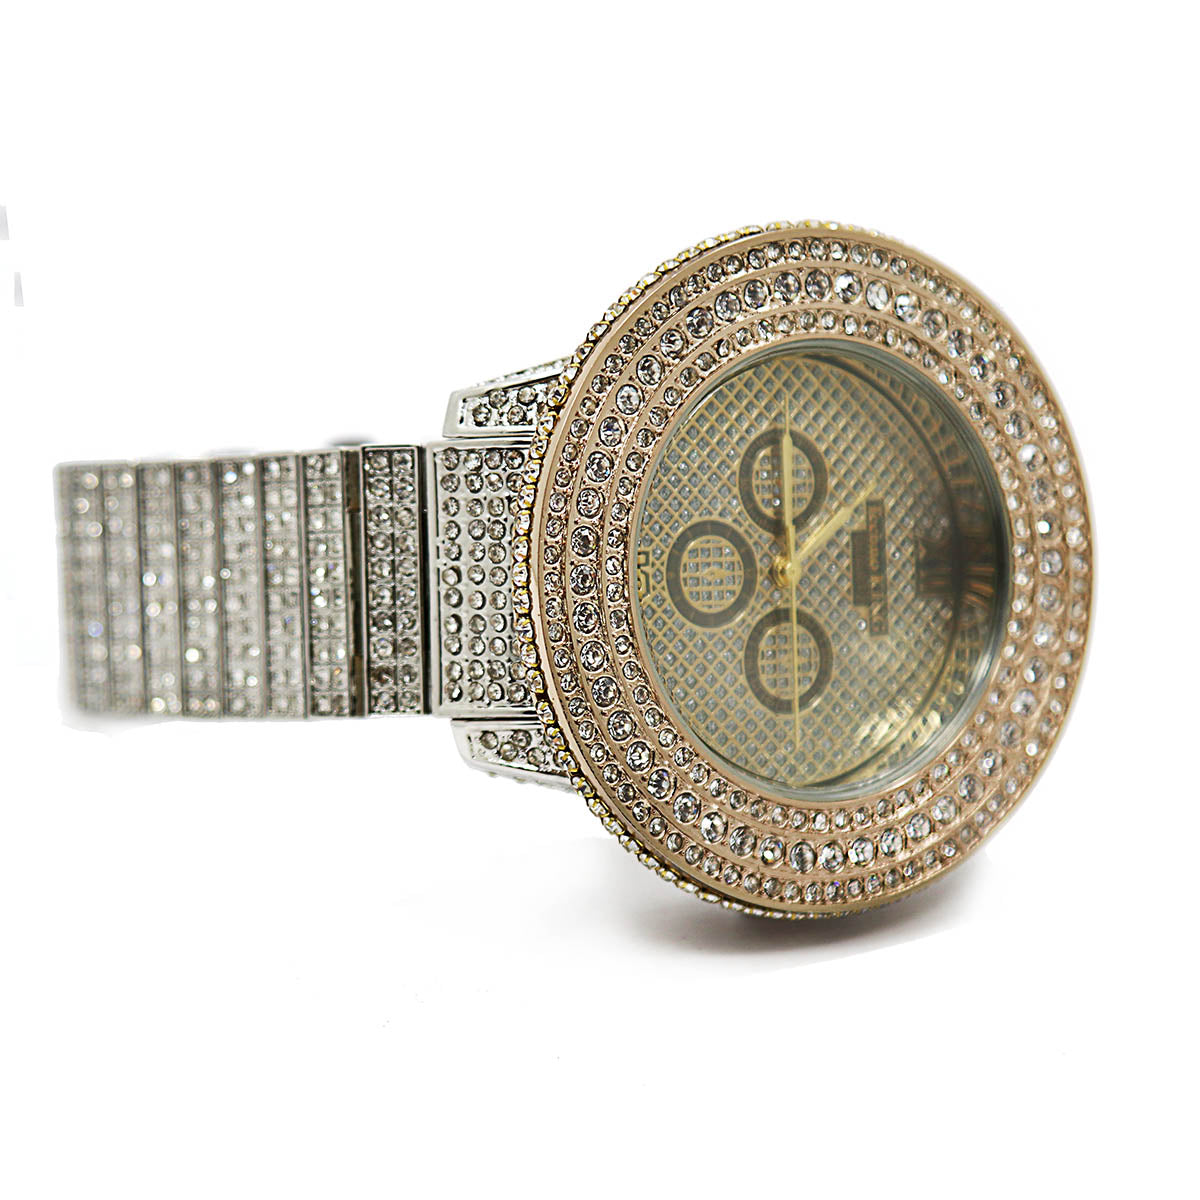 Two Tone Gold Ice Out Techno KING Watch & Bracelet SET